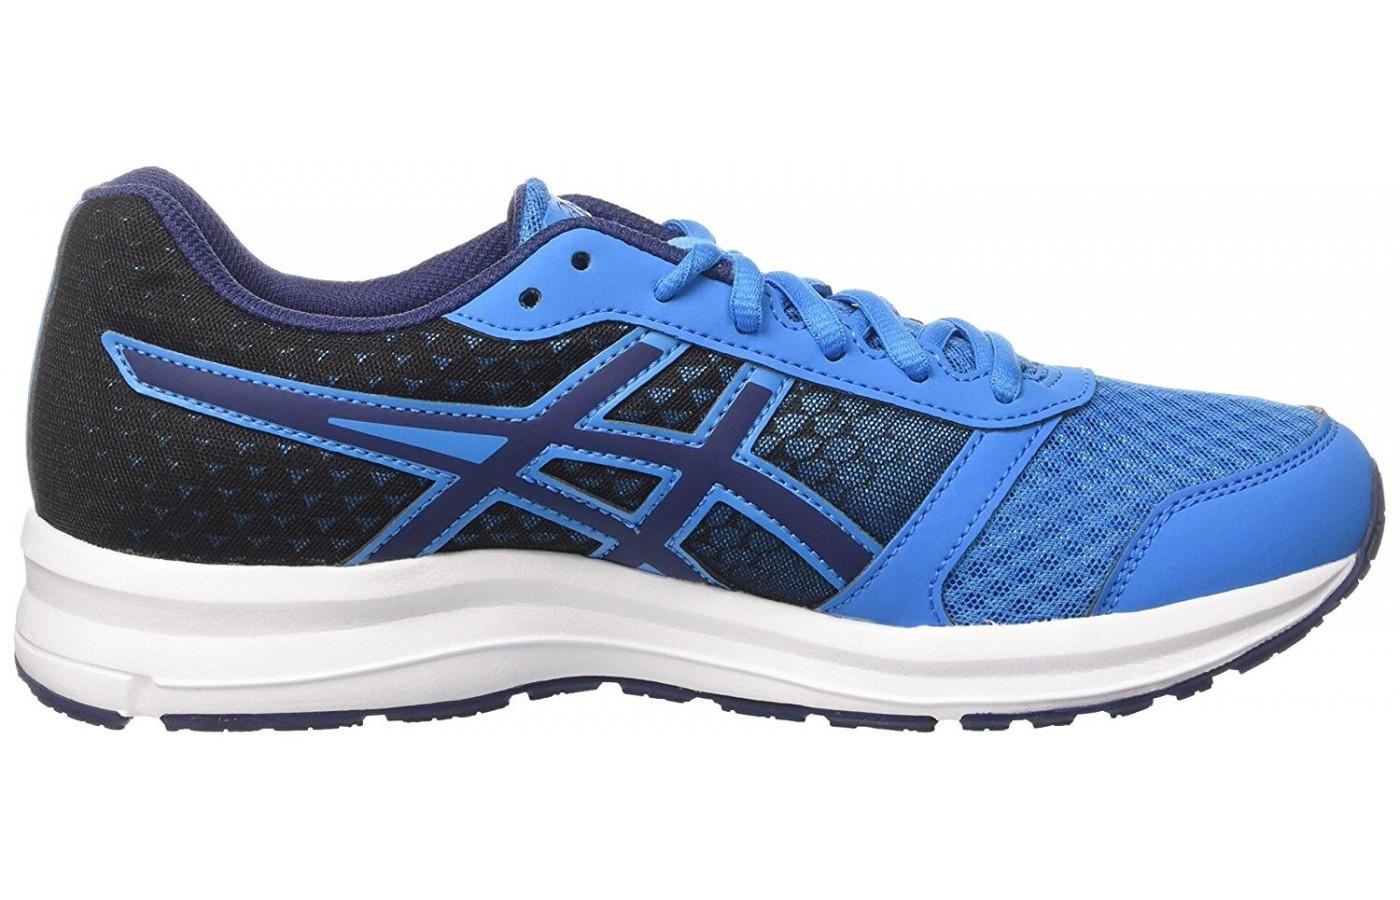 here is a profile of the ASICS Patriot 8 